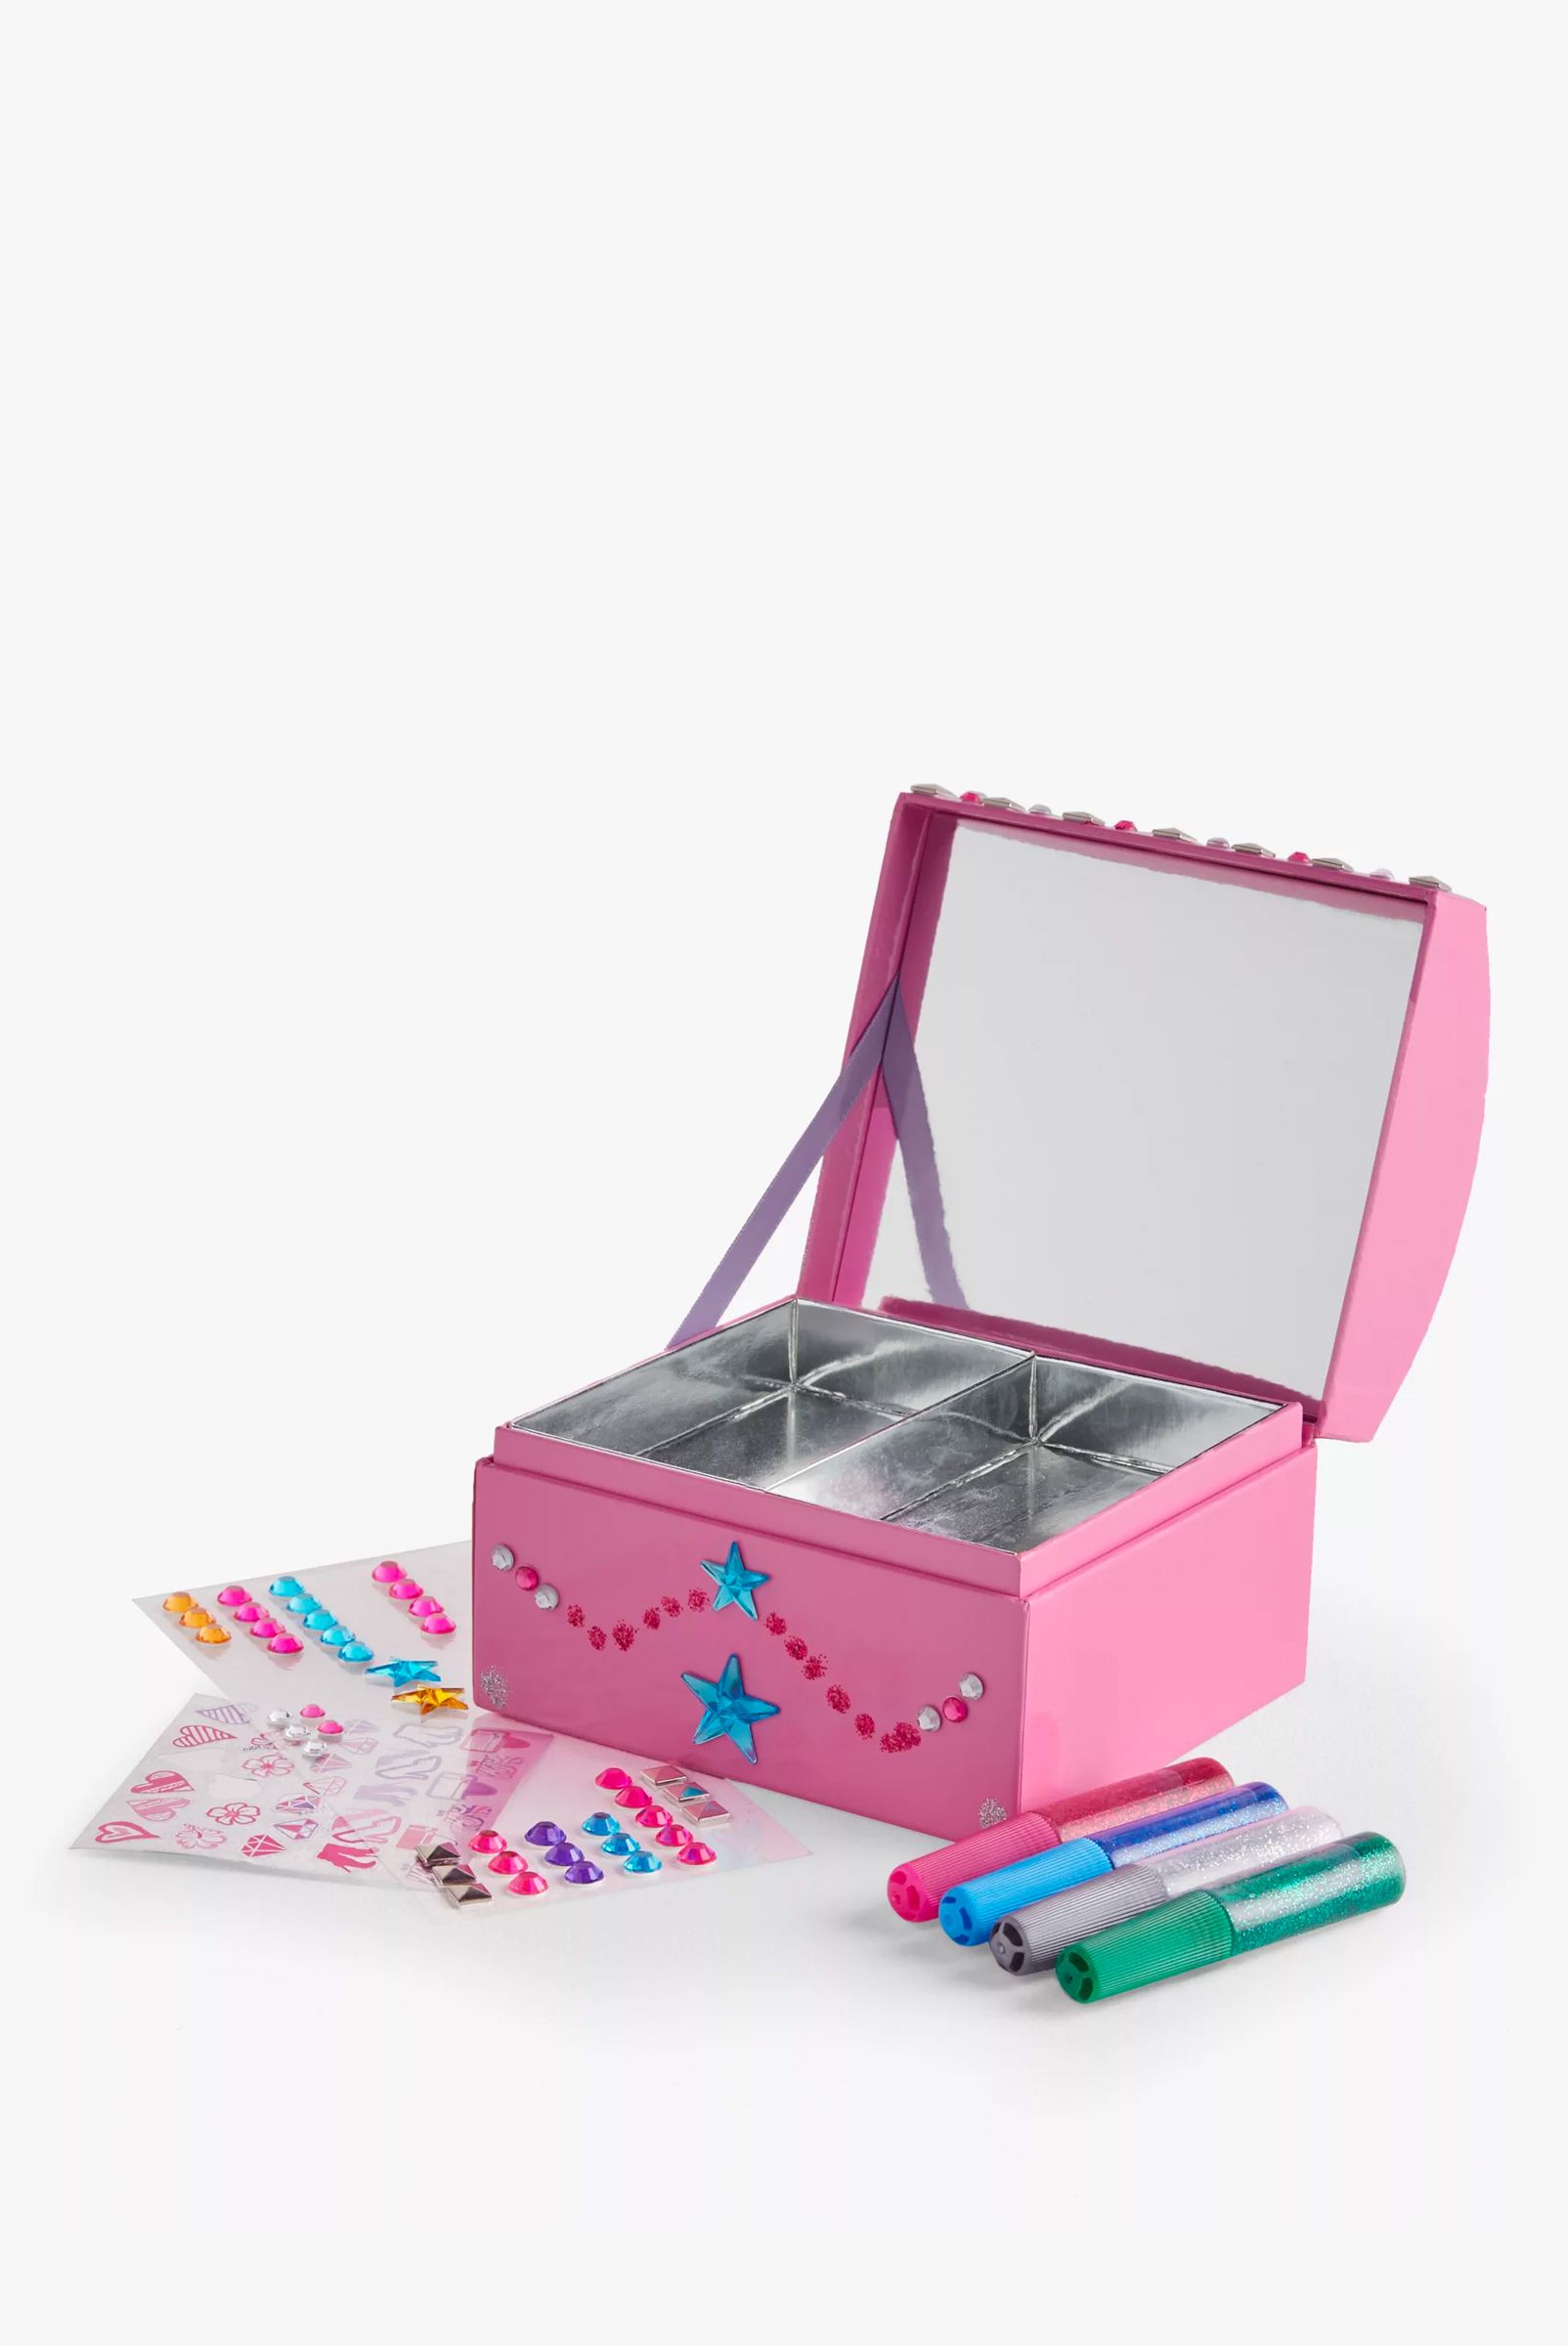 John Lewis Decorate Your Own Jewellery Box, £10